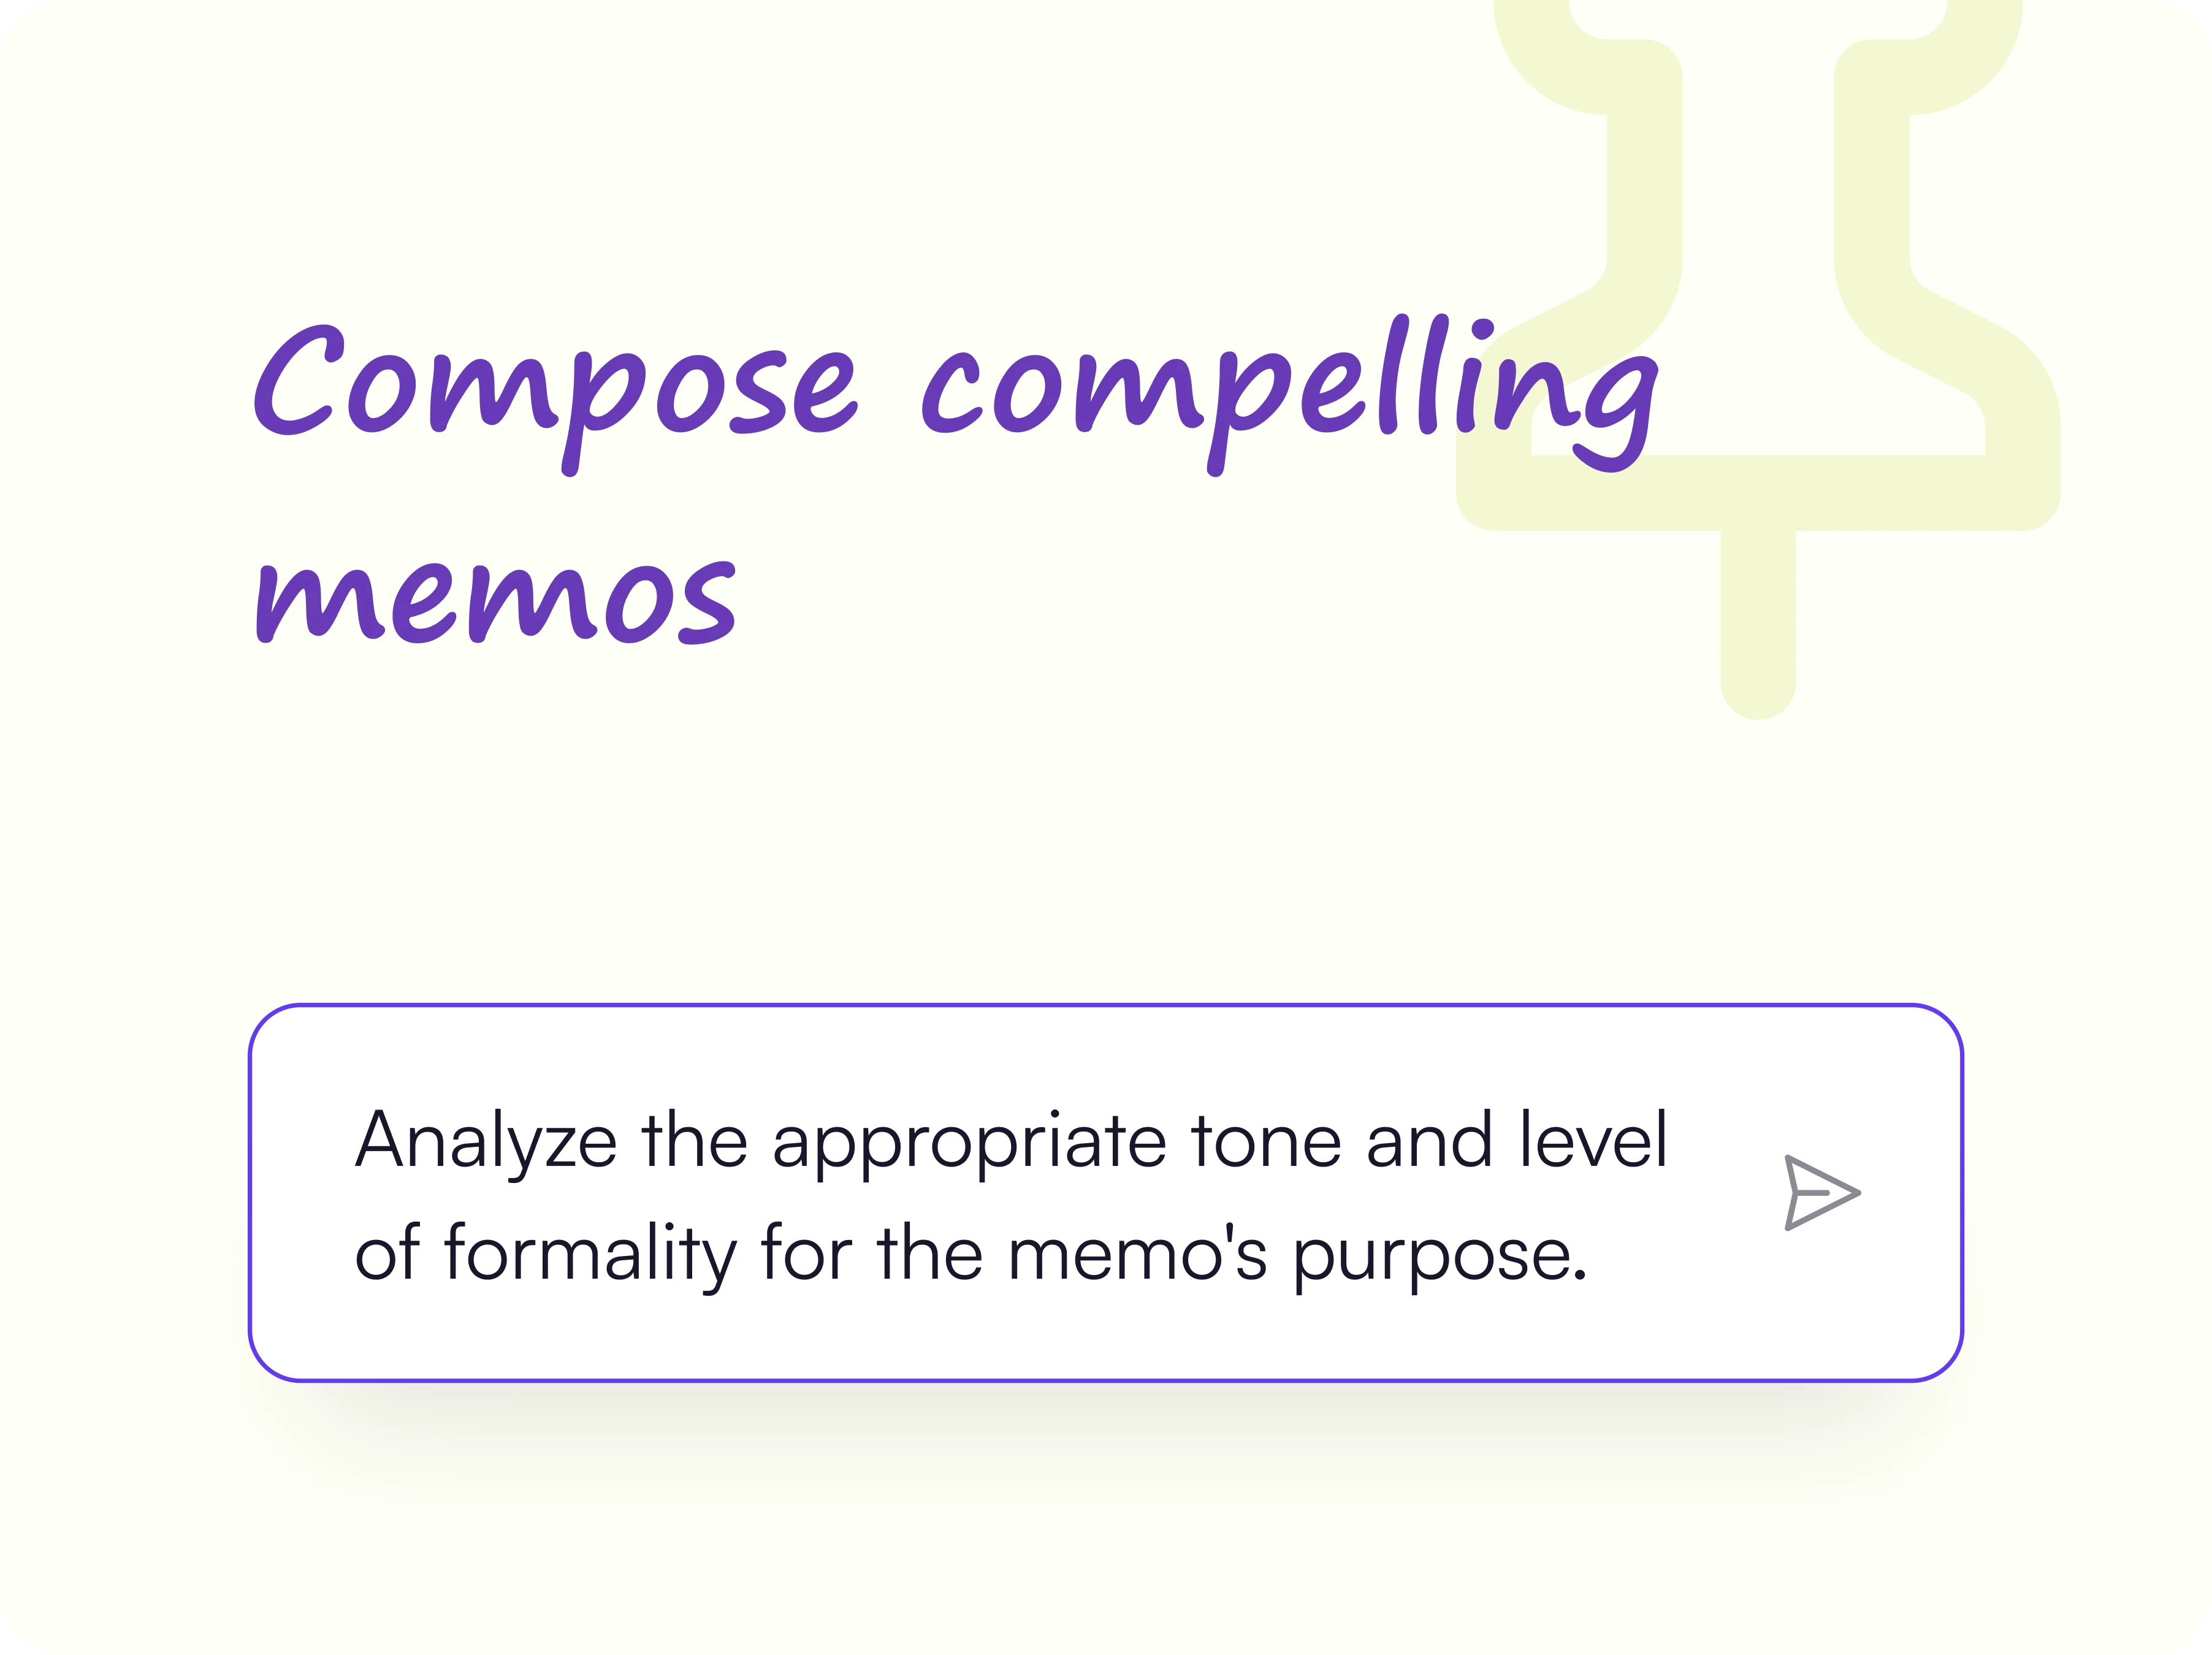 Use case - Prompt to compose compelling memos using DocXter as your AI memo assistant